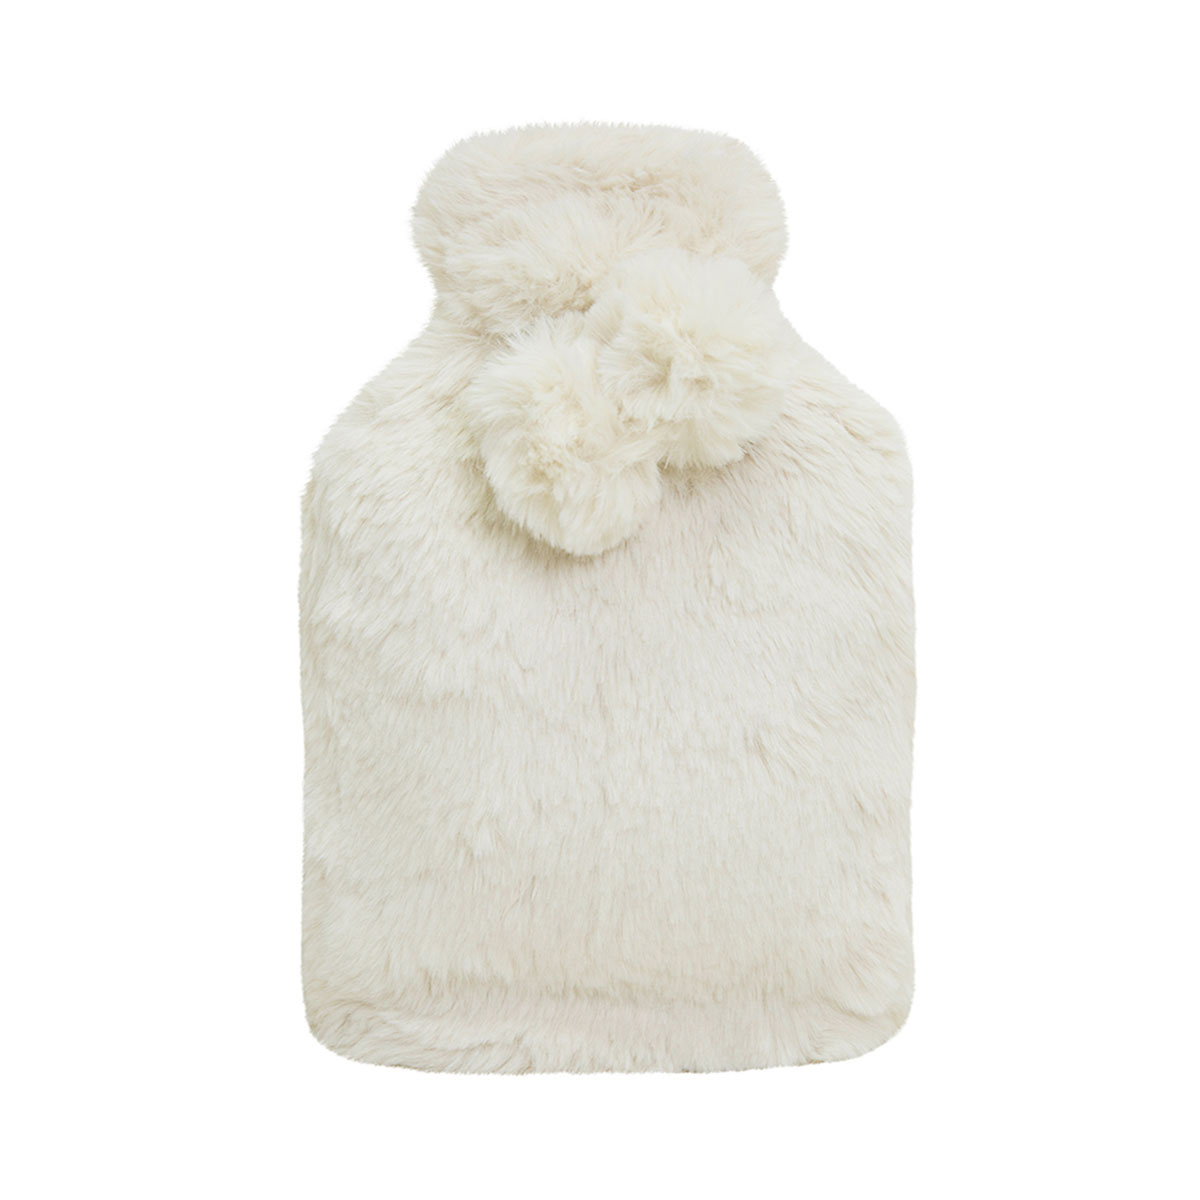 J.Elliot Home Amara Hot Water Bottle with Super Plush Faux Fur Cover  Price